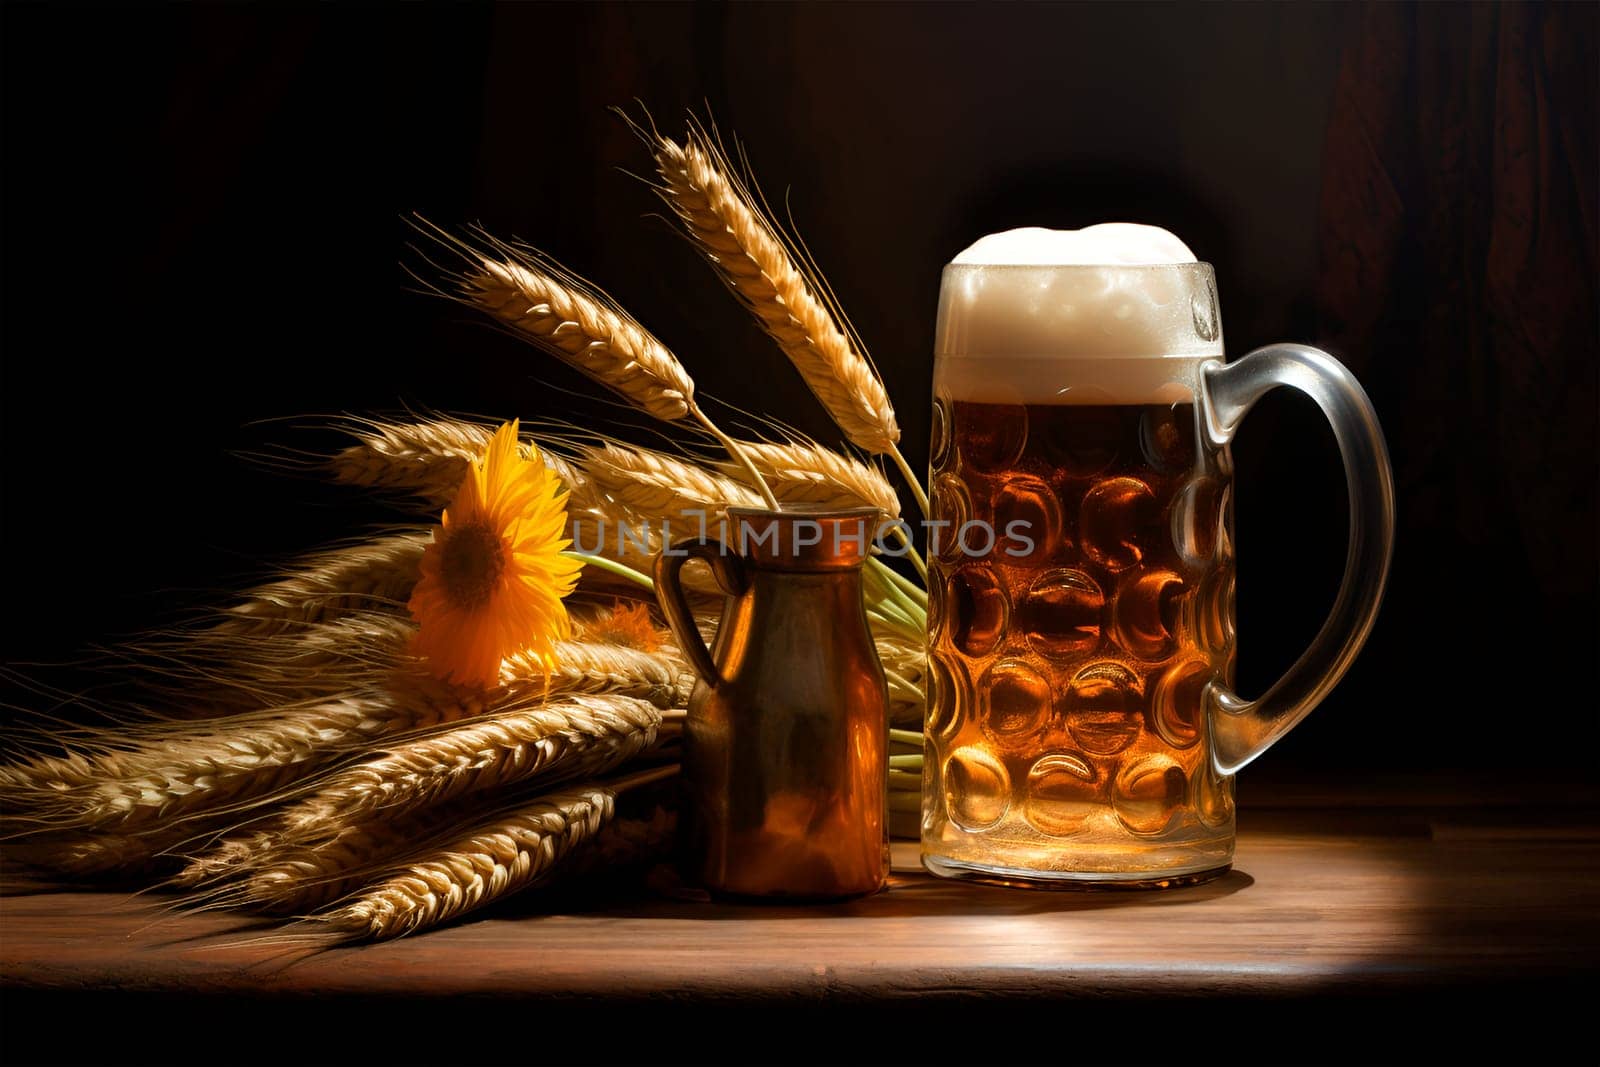 Beer in a jug with wheat and malt on a wooden table. Oktouberfest beer making festival by Ramanouskaya